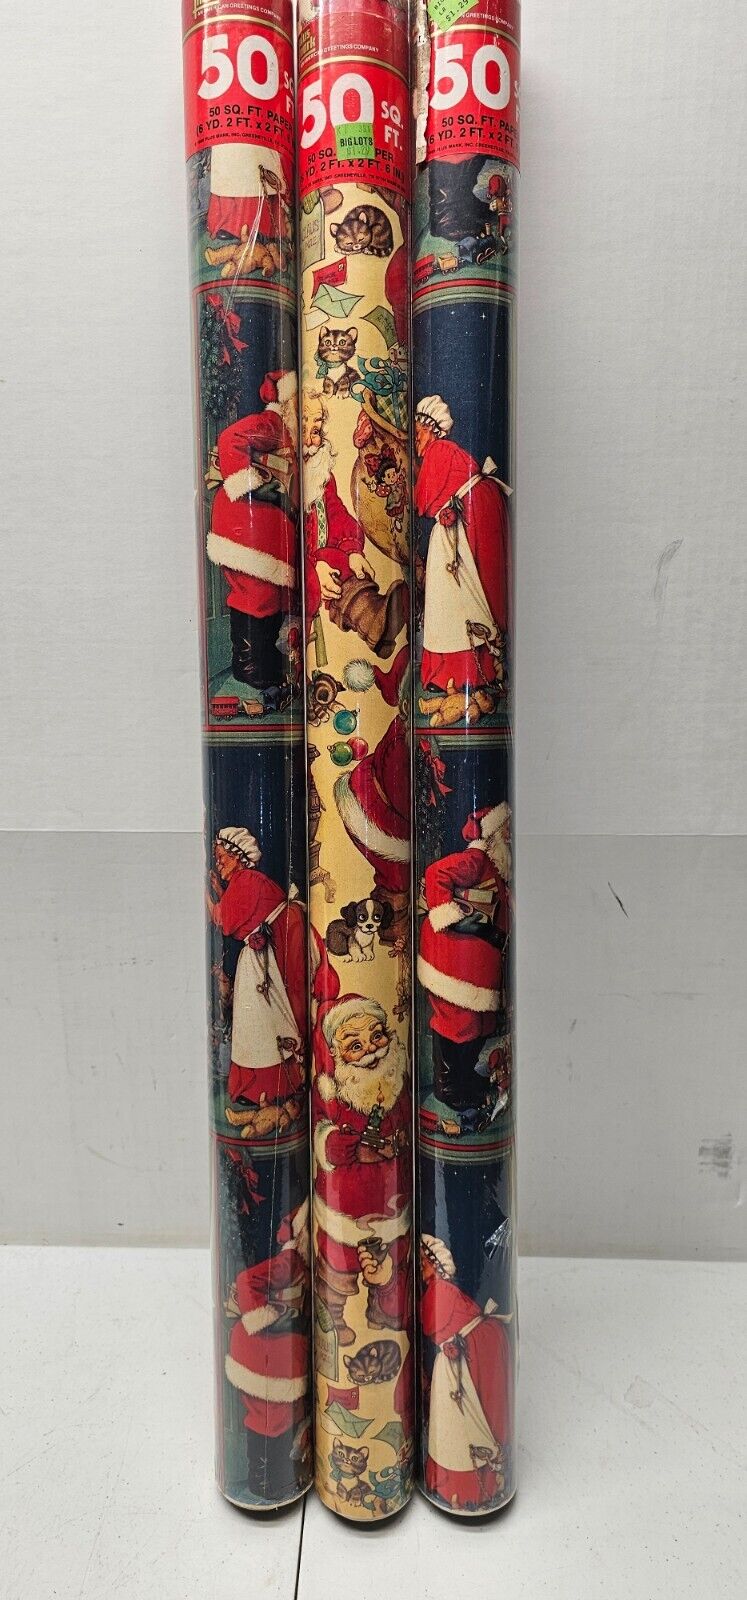 Vintage Plus Mark - American Greetings Christmas Wrapping Paper Rolls 150' NEW